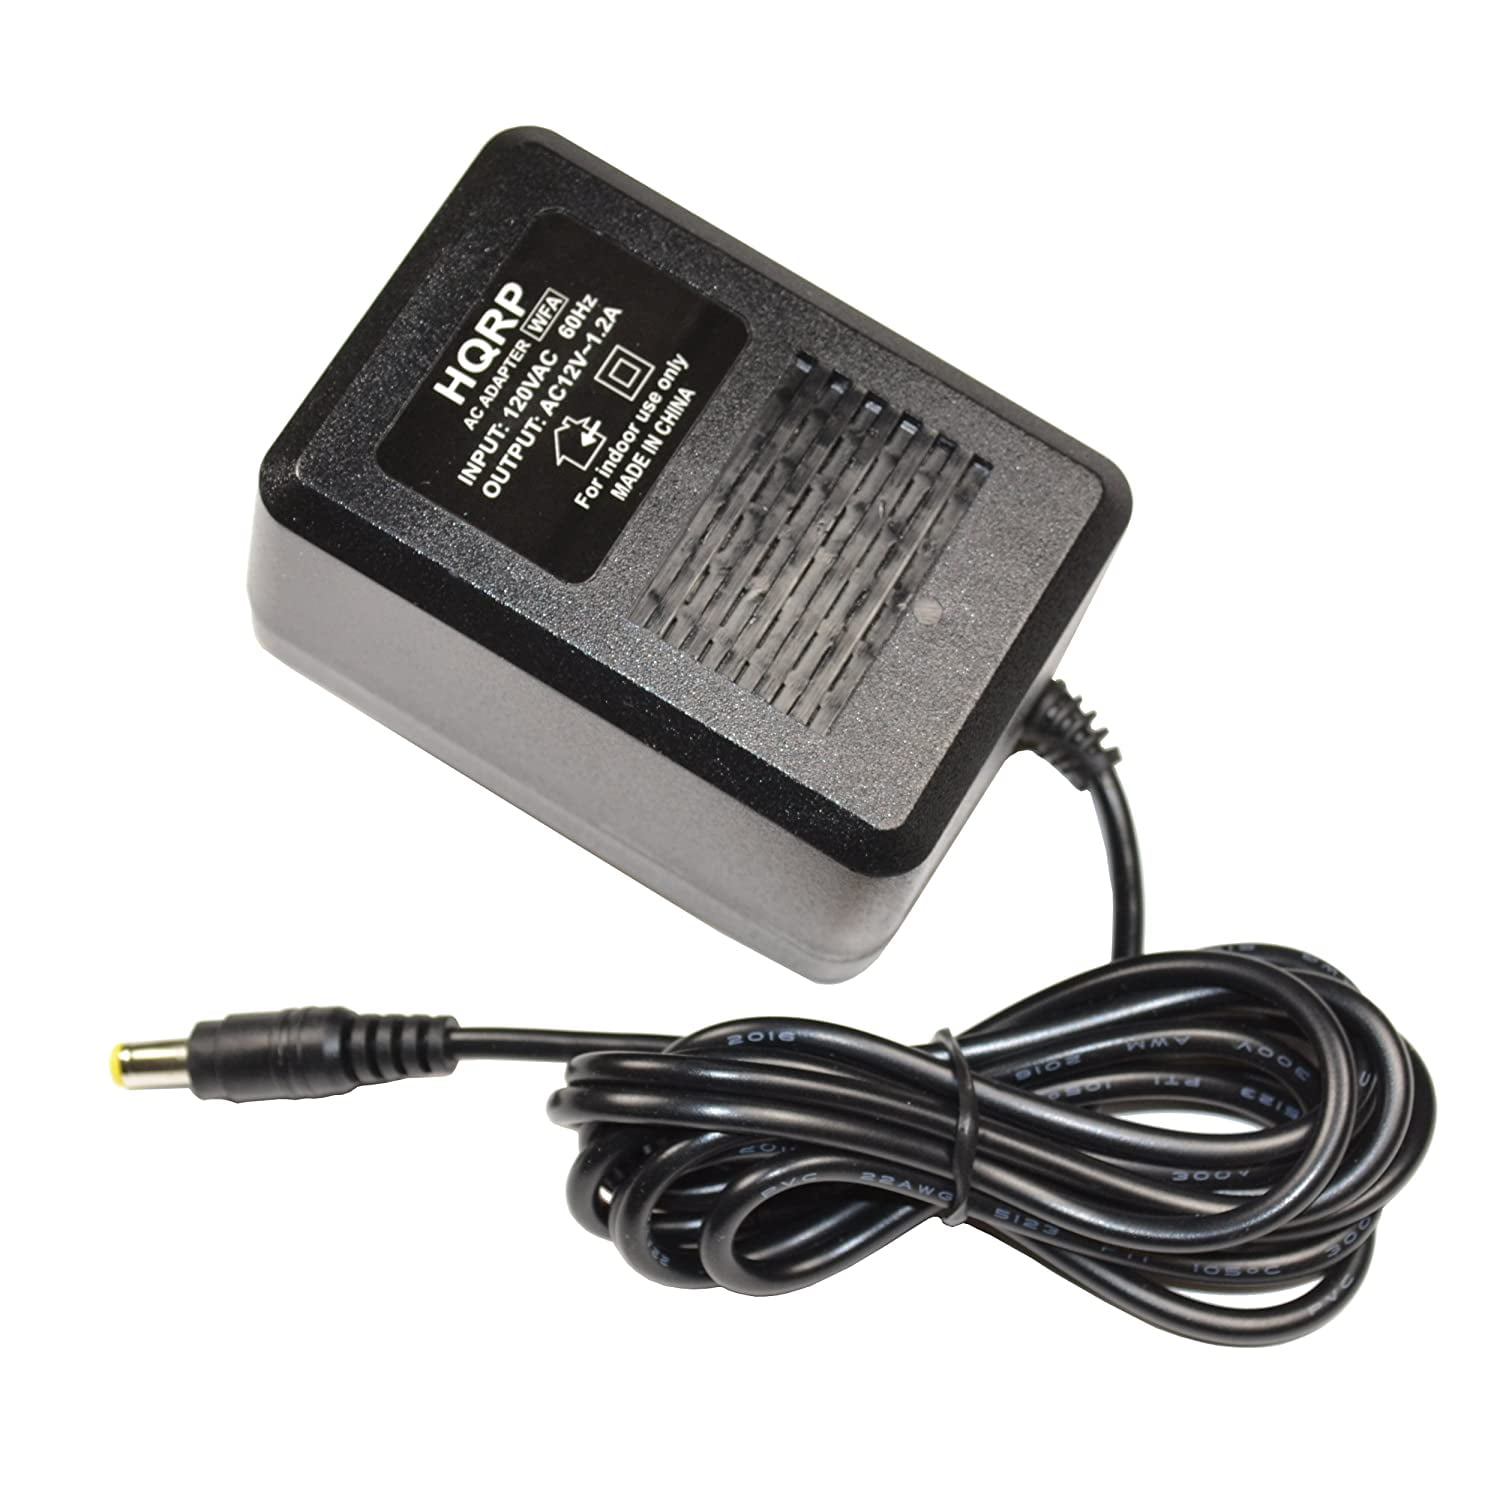 Boston Acoustics AC Adapter Dk1201a5-1an Power Supply 12vac 1500ma for sale online 